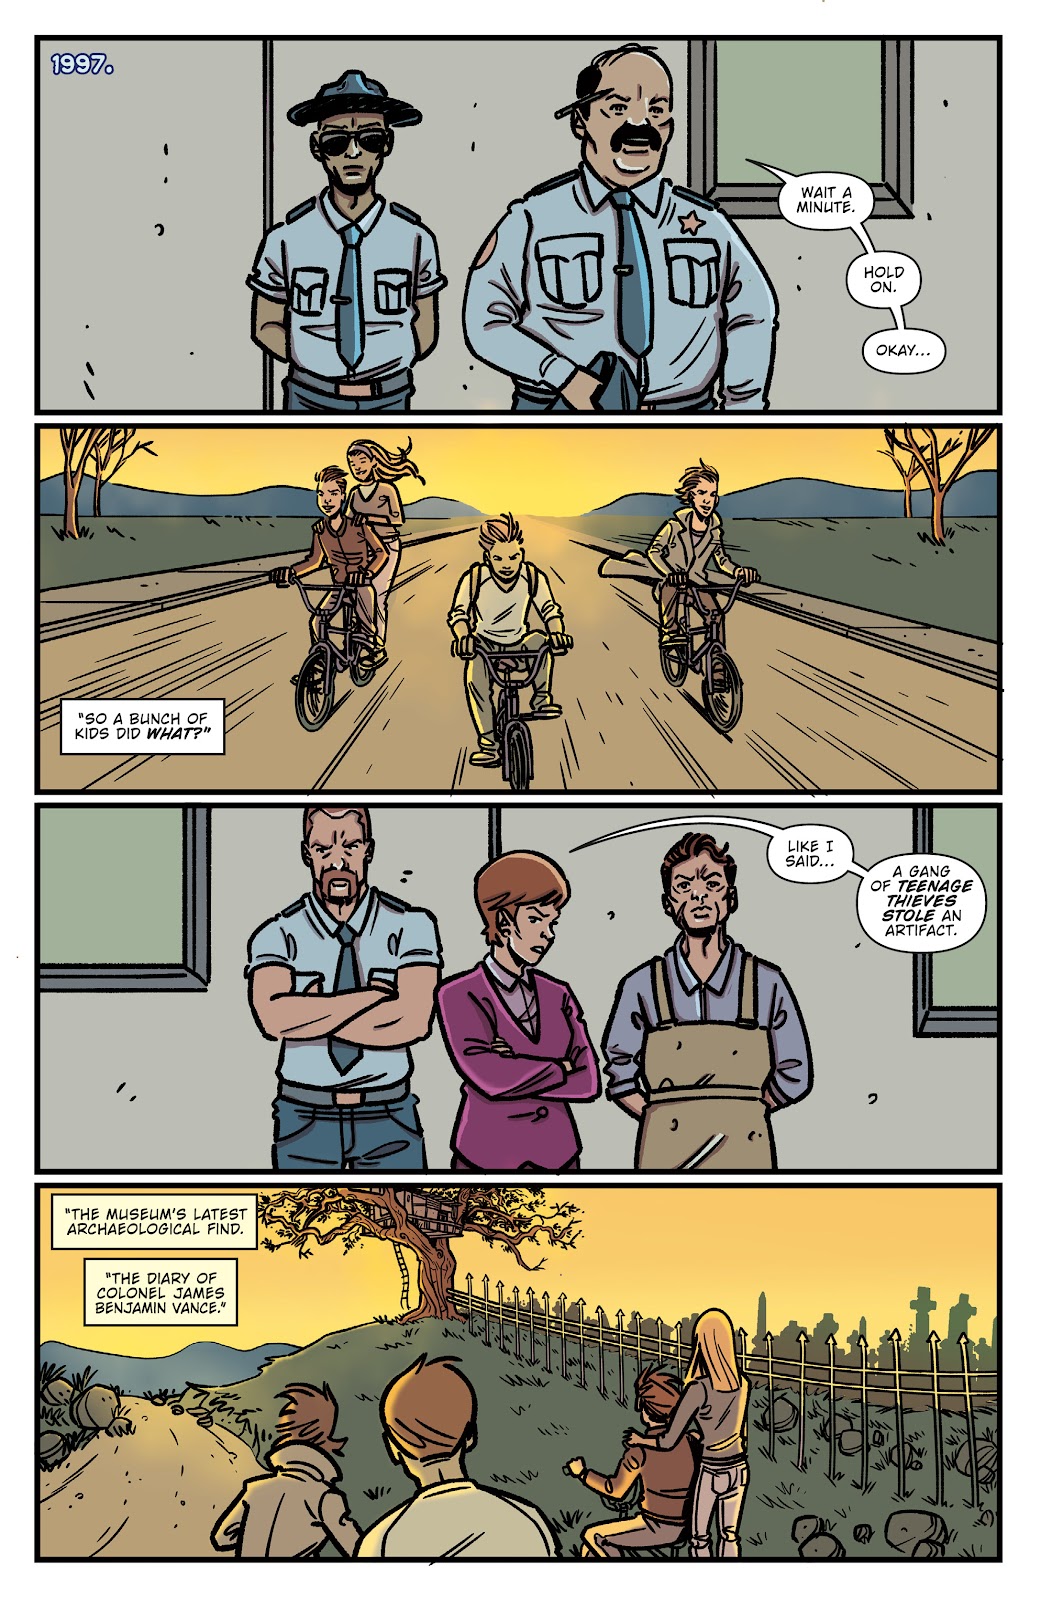 Cult Classic: Return to Whisper issue 2 & 3 - Page 28